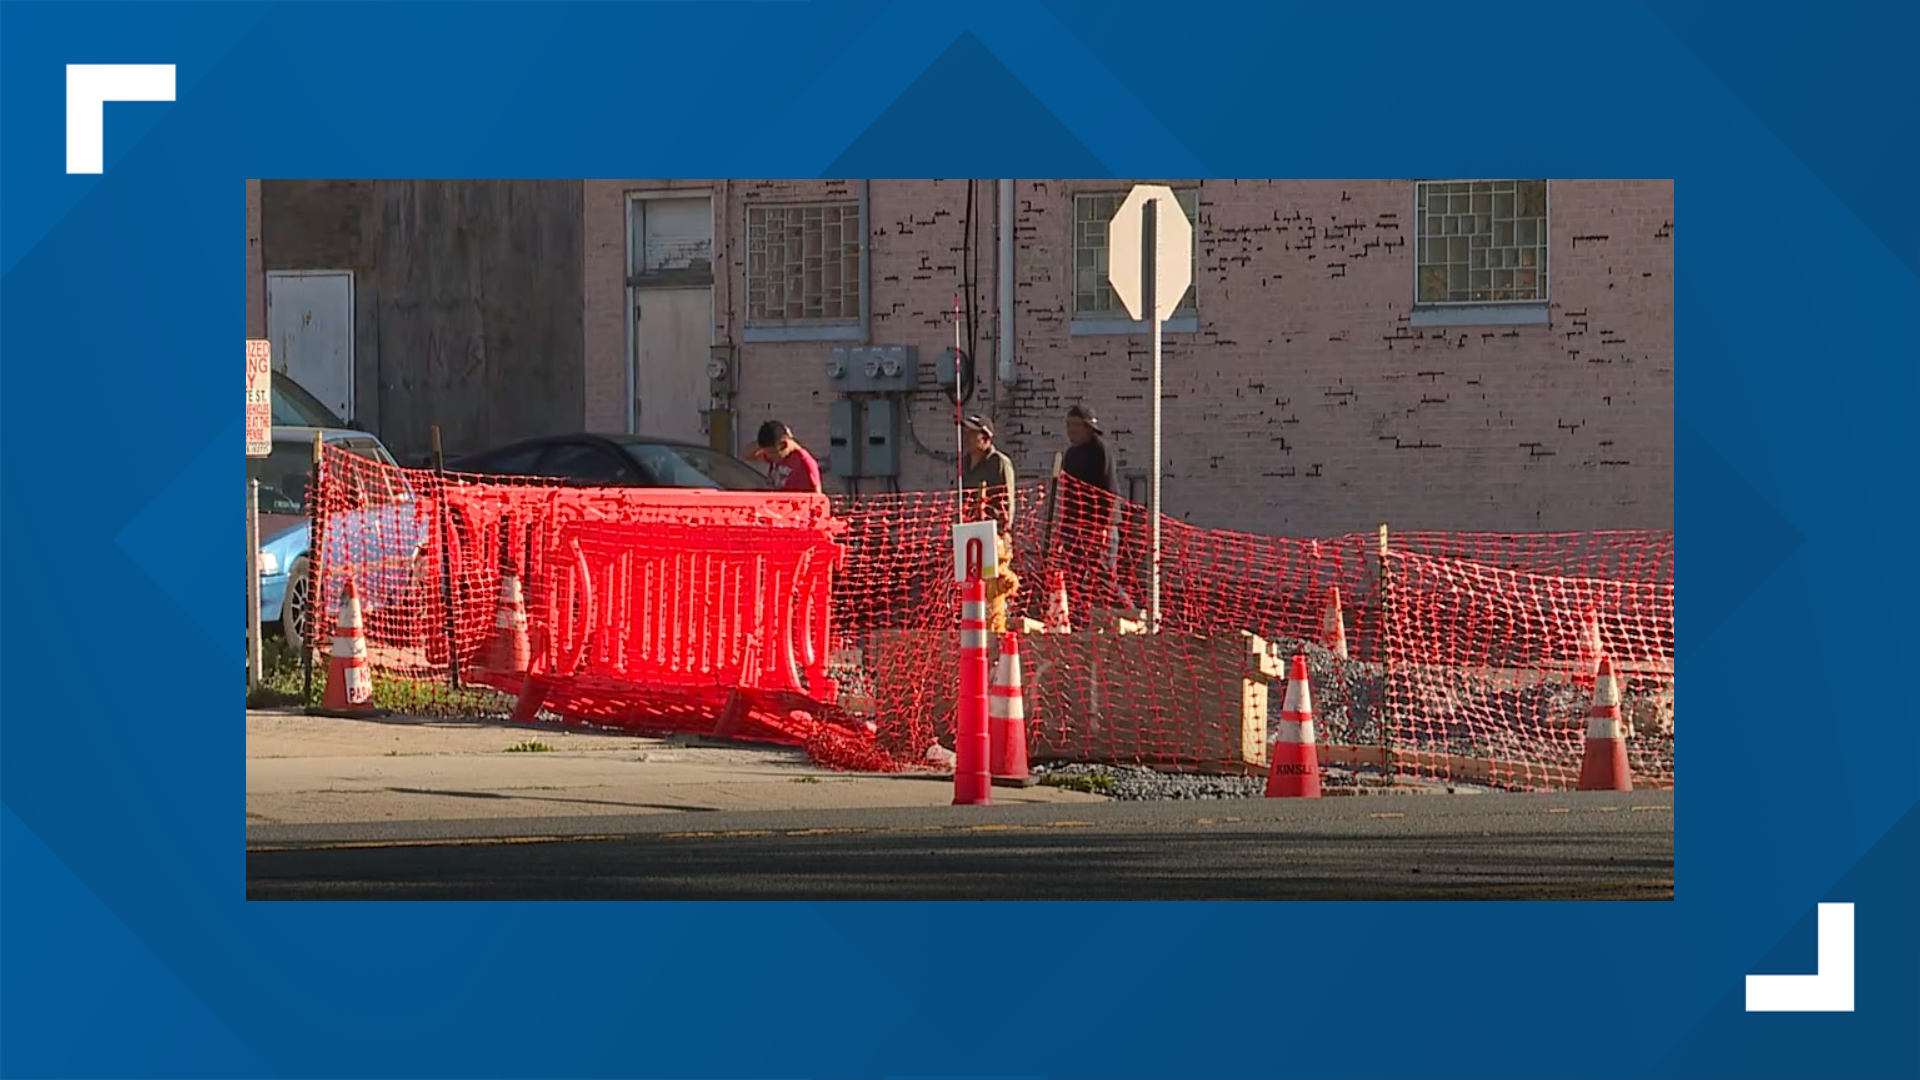 Construction on State Street temporarily ended in April after city leaders heard too many concerns about parking from area residents.